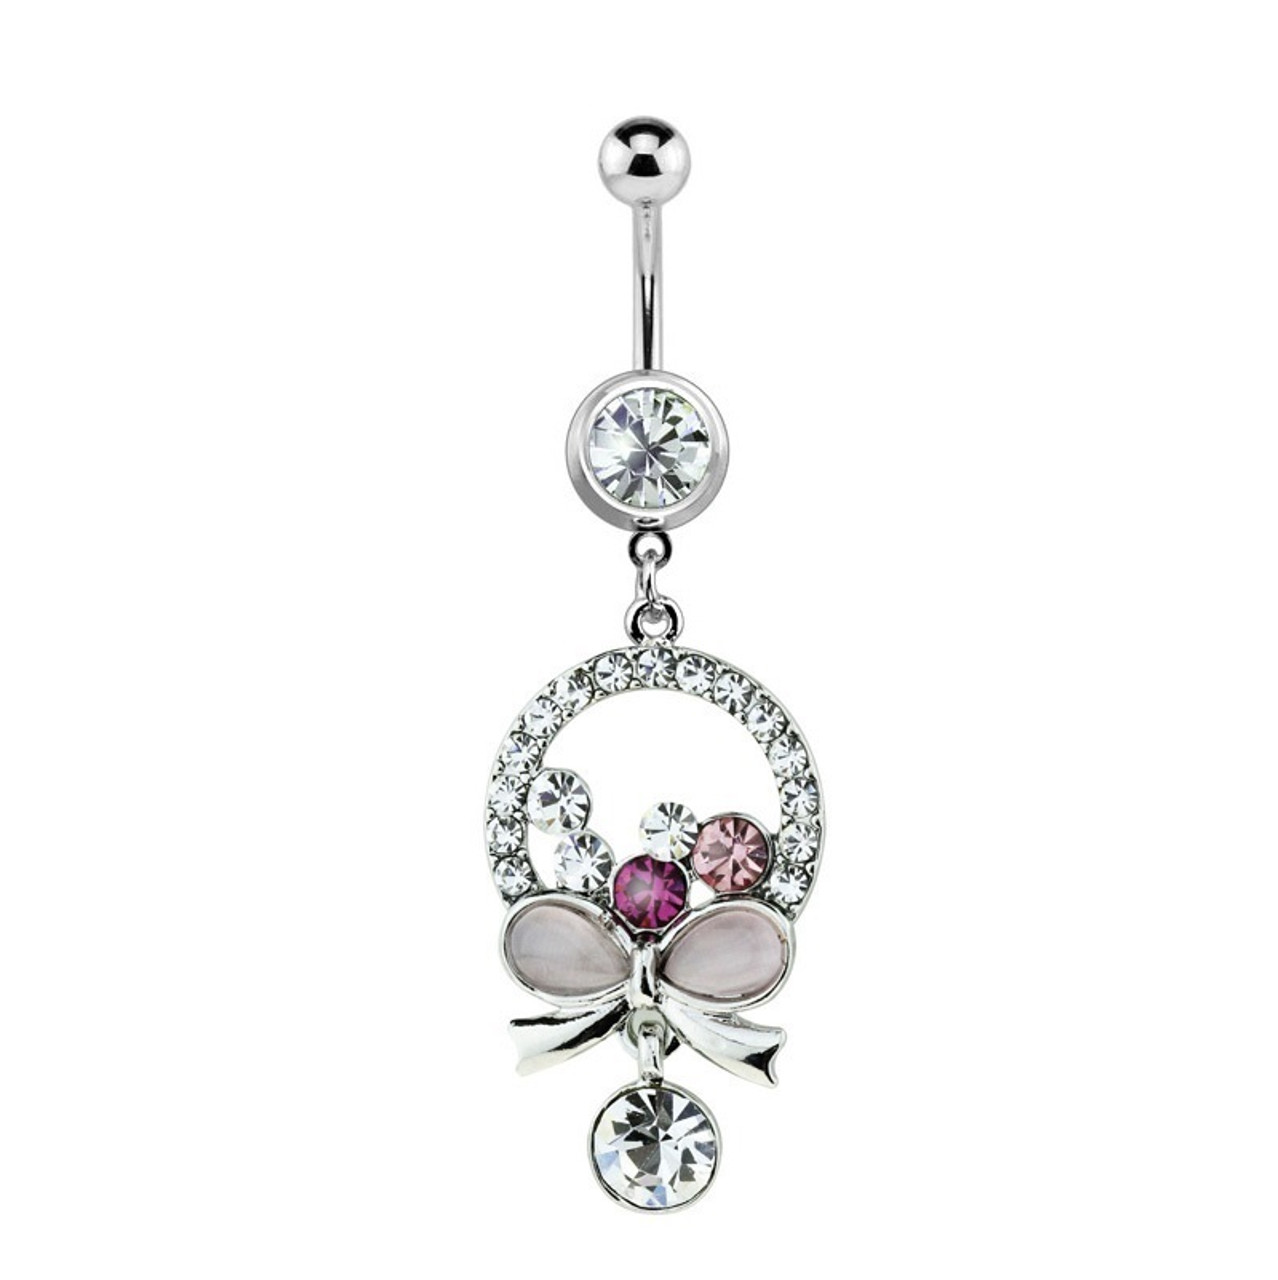 Bow Circle Design Navel Ring 14ga with Pink and Purple CZ Jewels